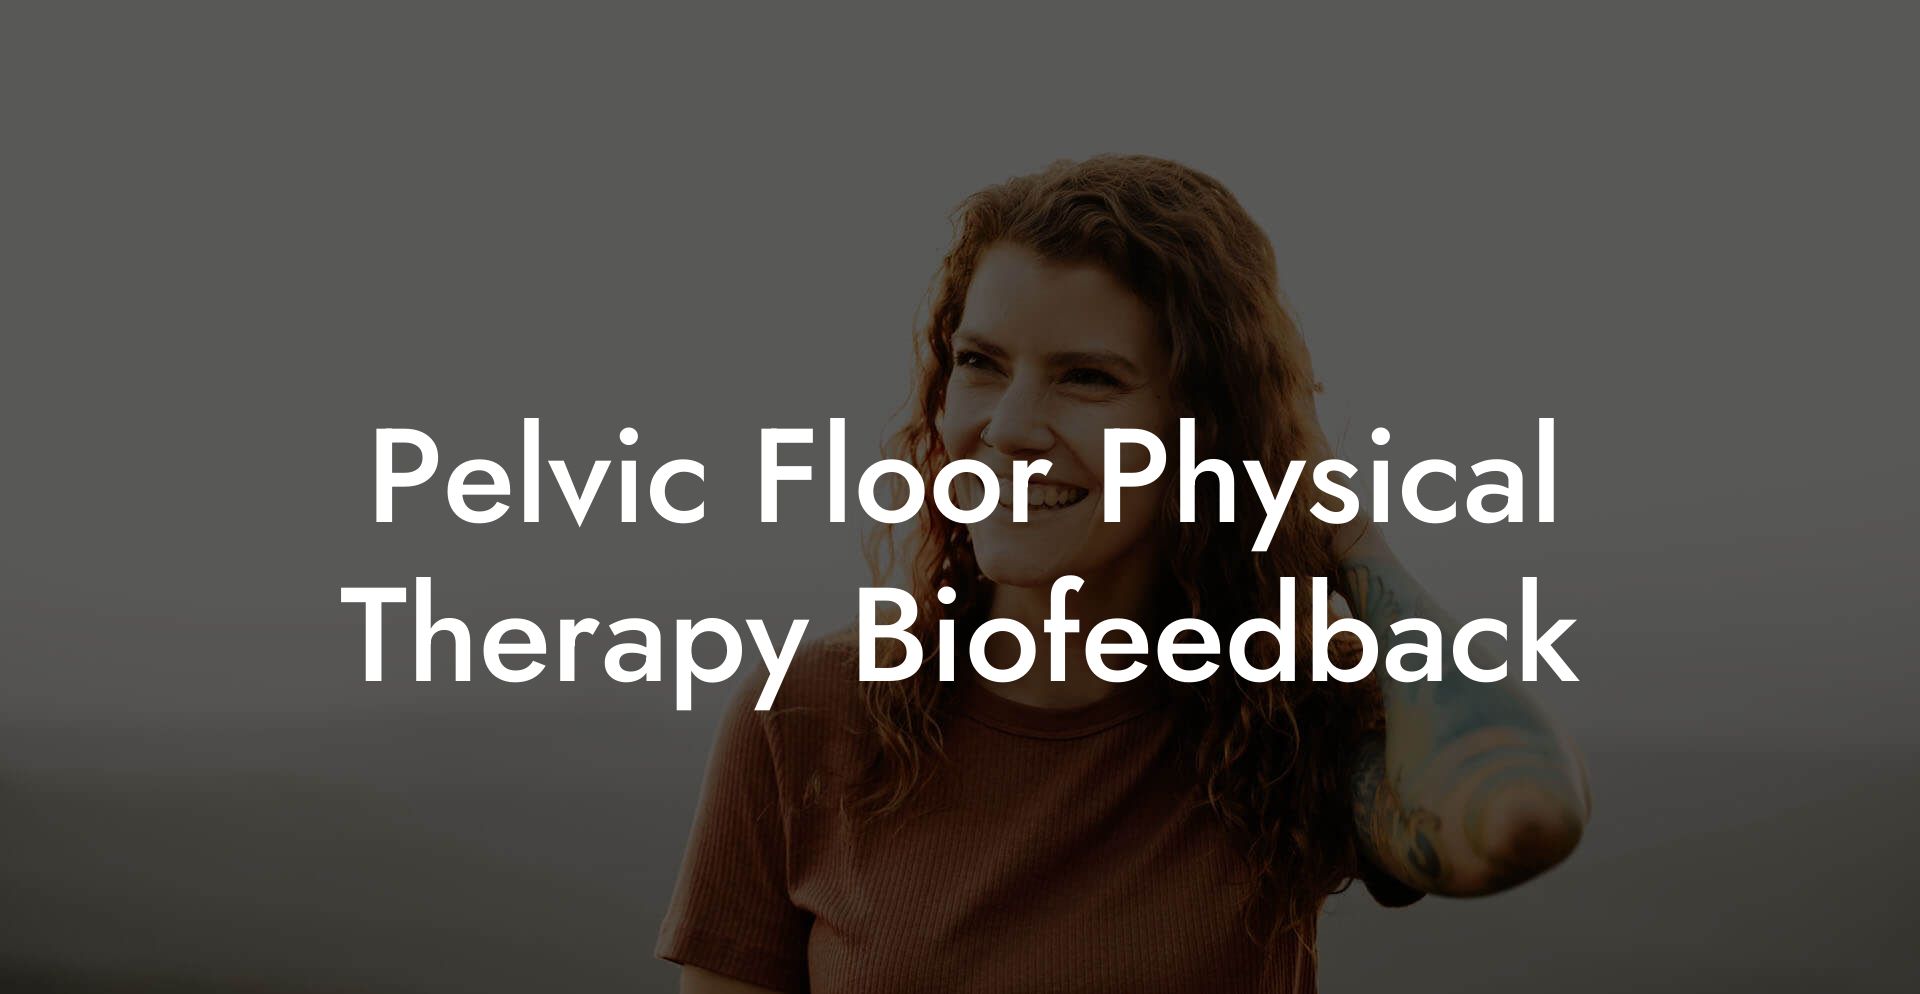 Pelvic Floor Physical Therapy Biofeedback